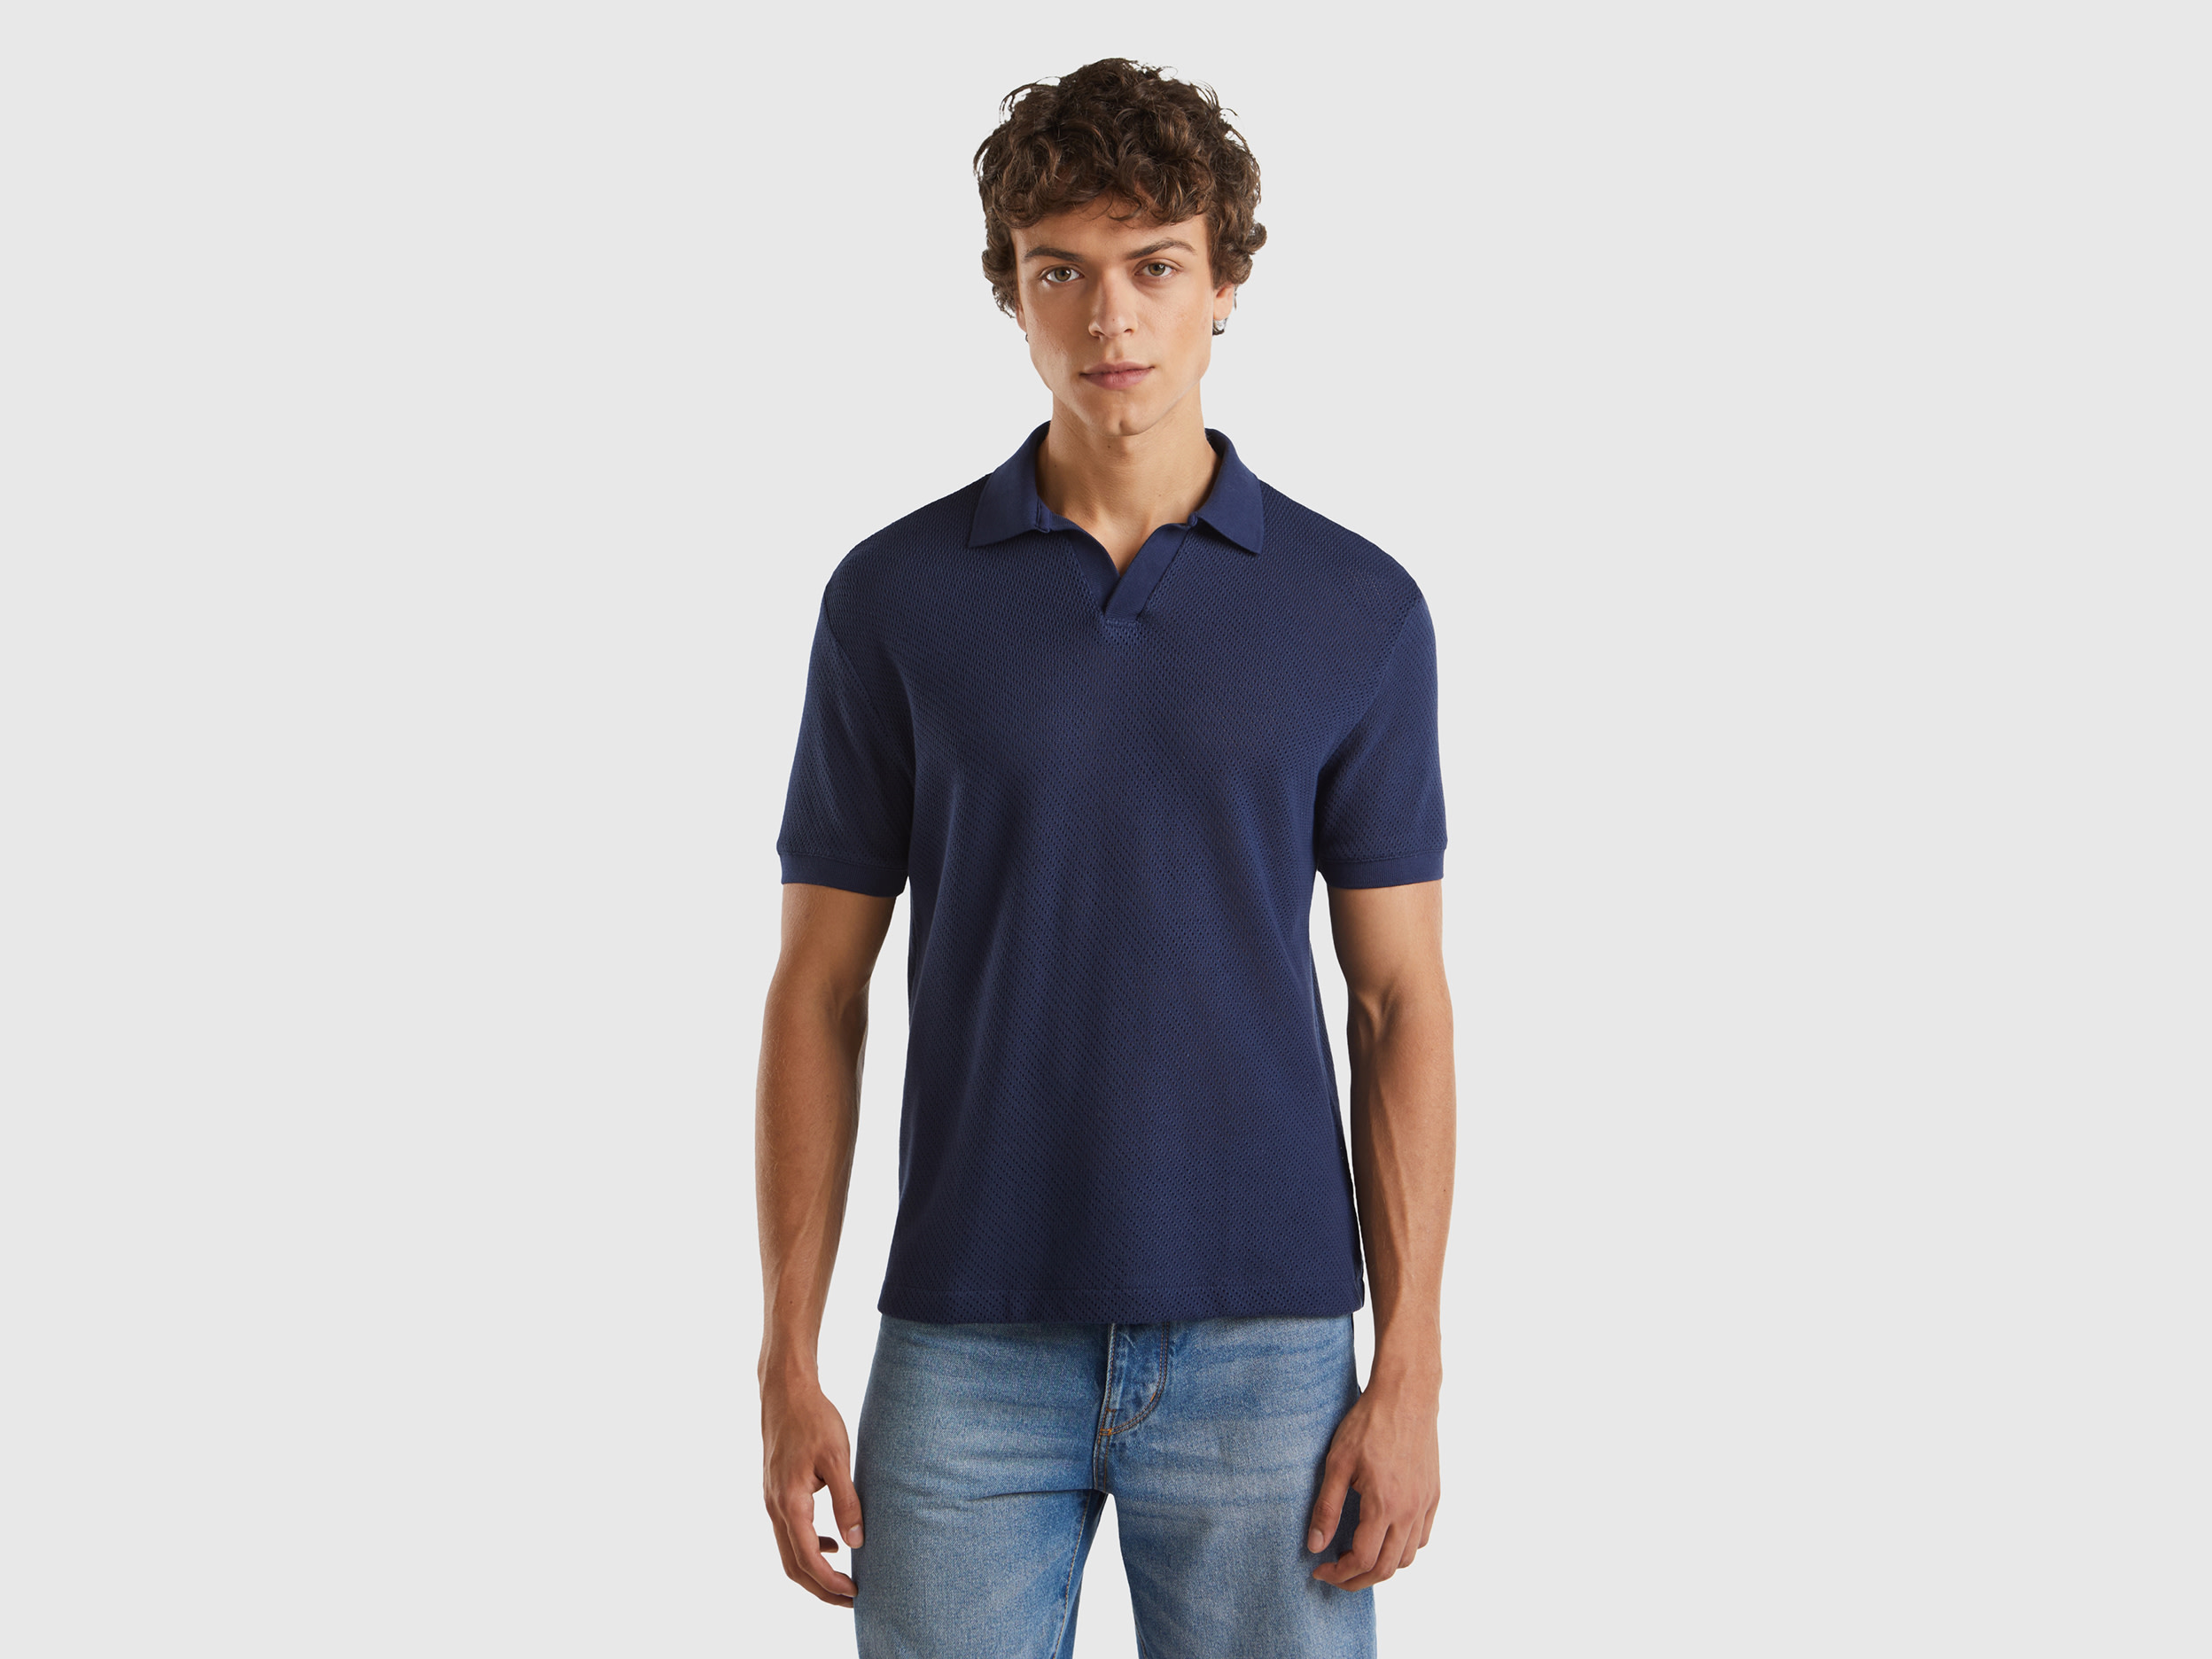 Image of Benetton, Perforated Cotton Polo Shirt, size M, Dark Blue, Men